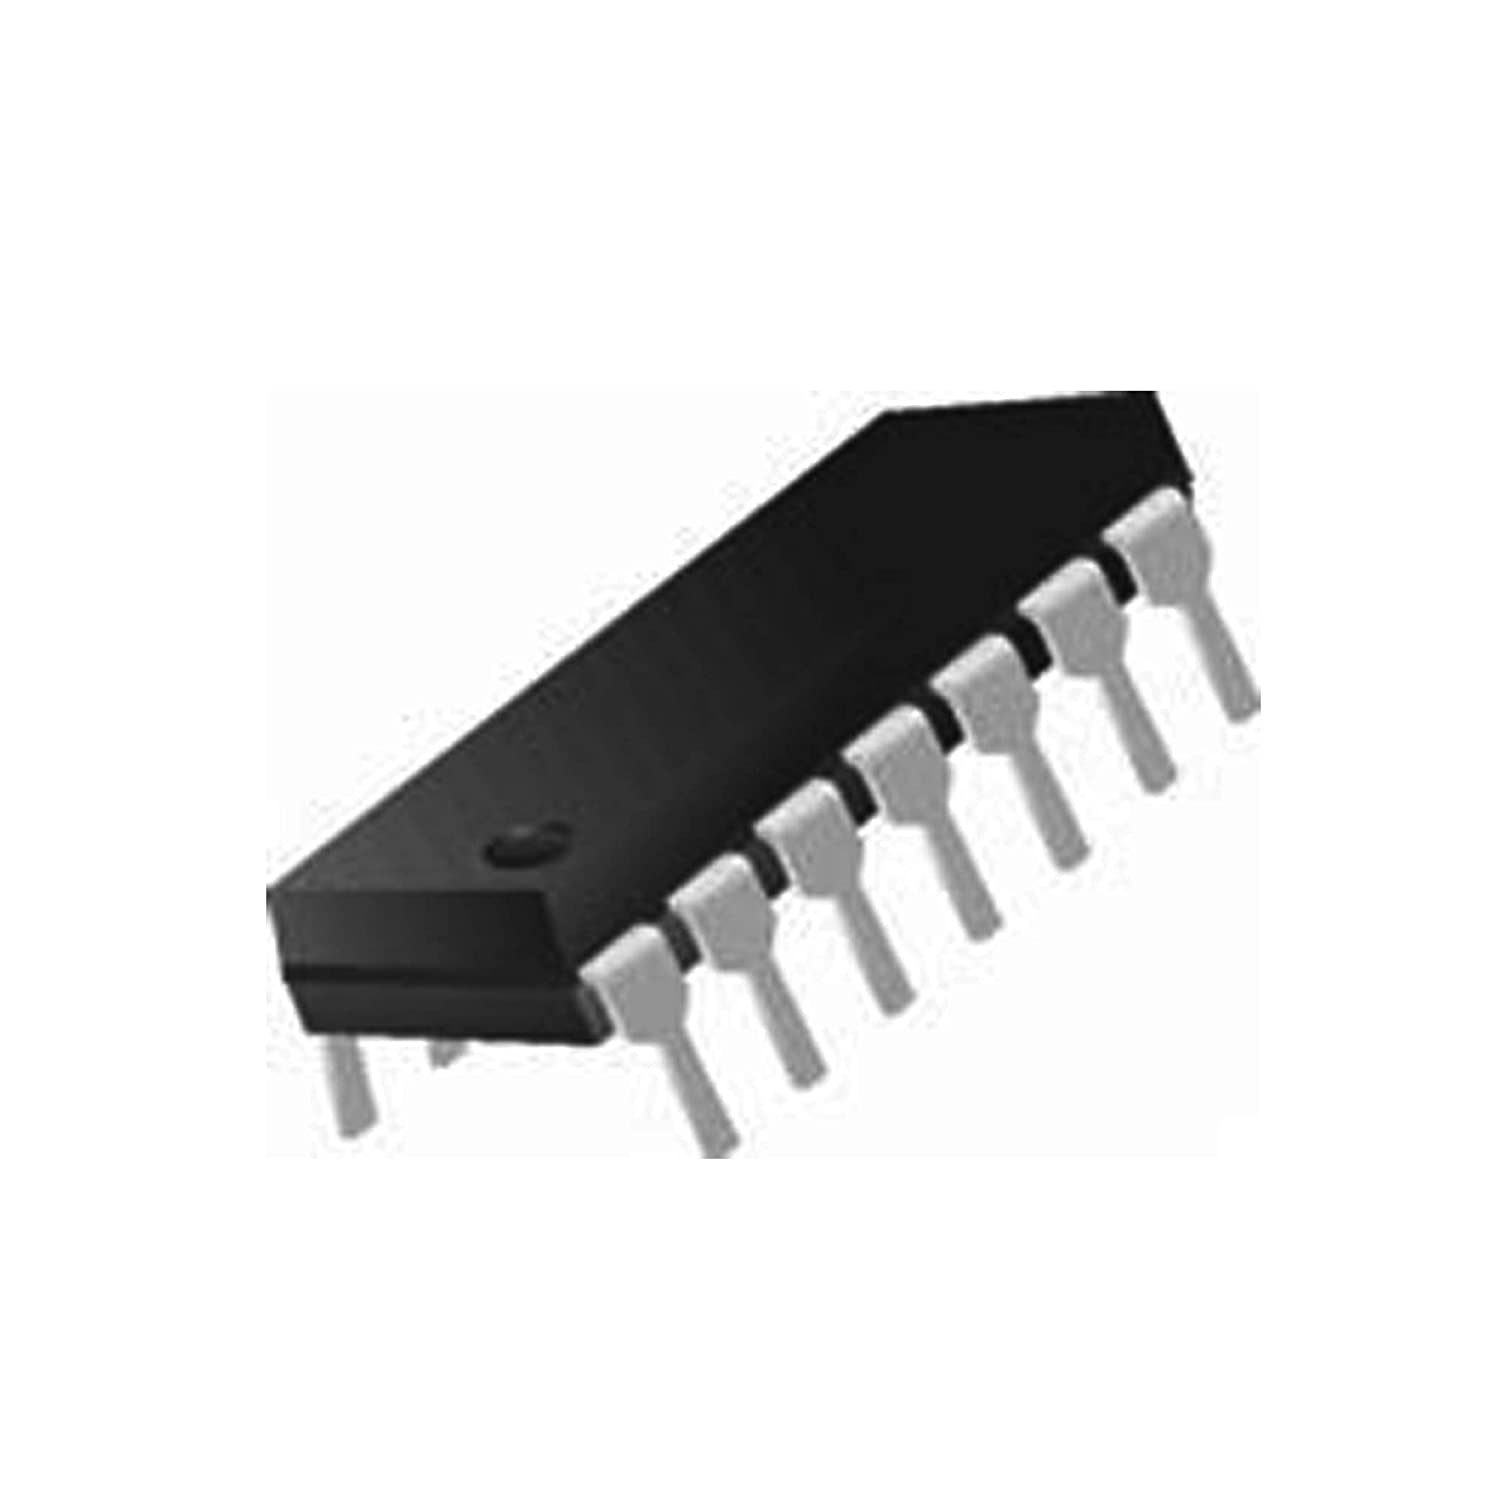 7411 TRIPLE AND LOGIC GATE 3 IN 1 OUT PDIP-14 IC